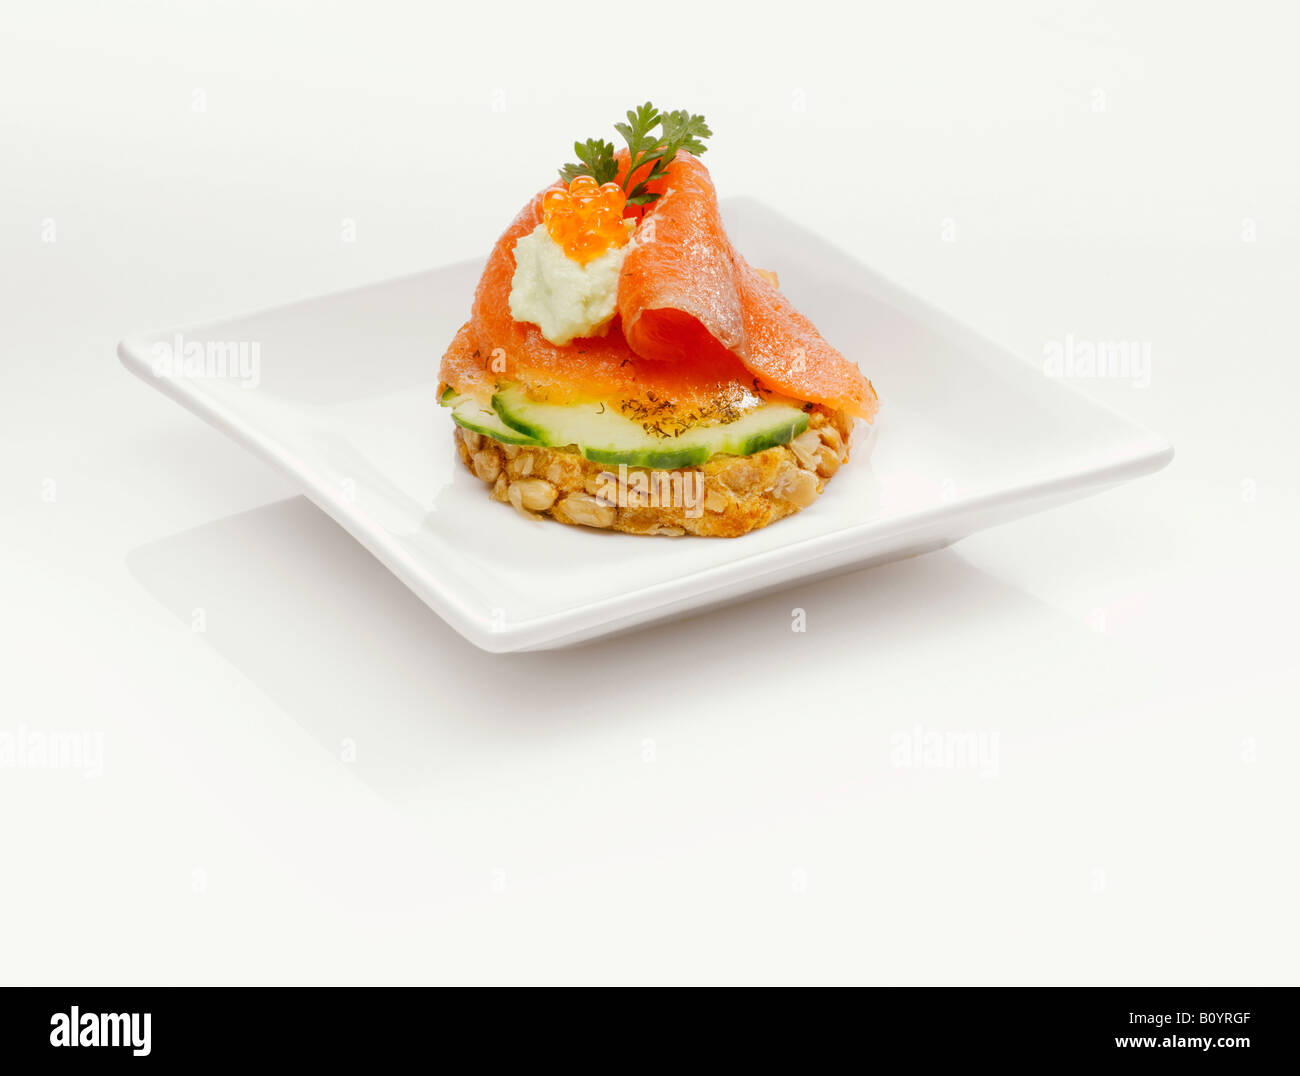 Sandwich with salmon and cucumber slices Stock Photo